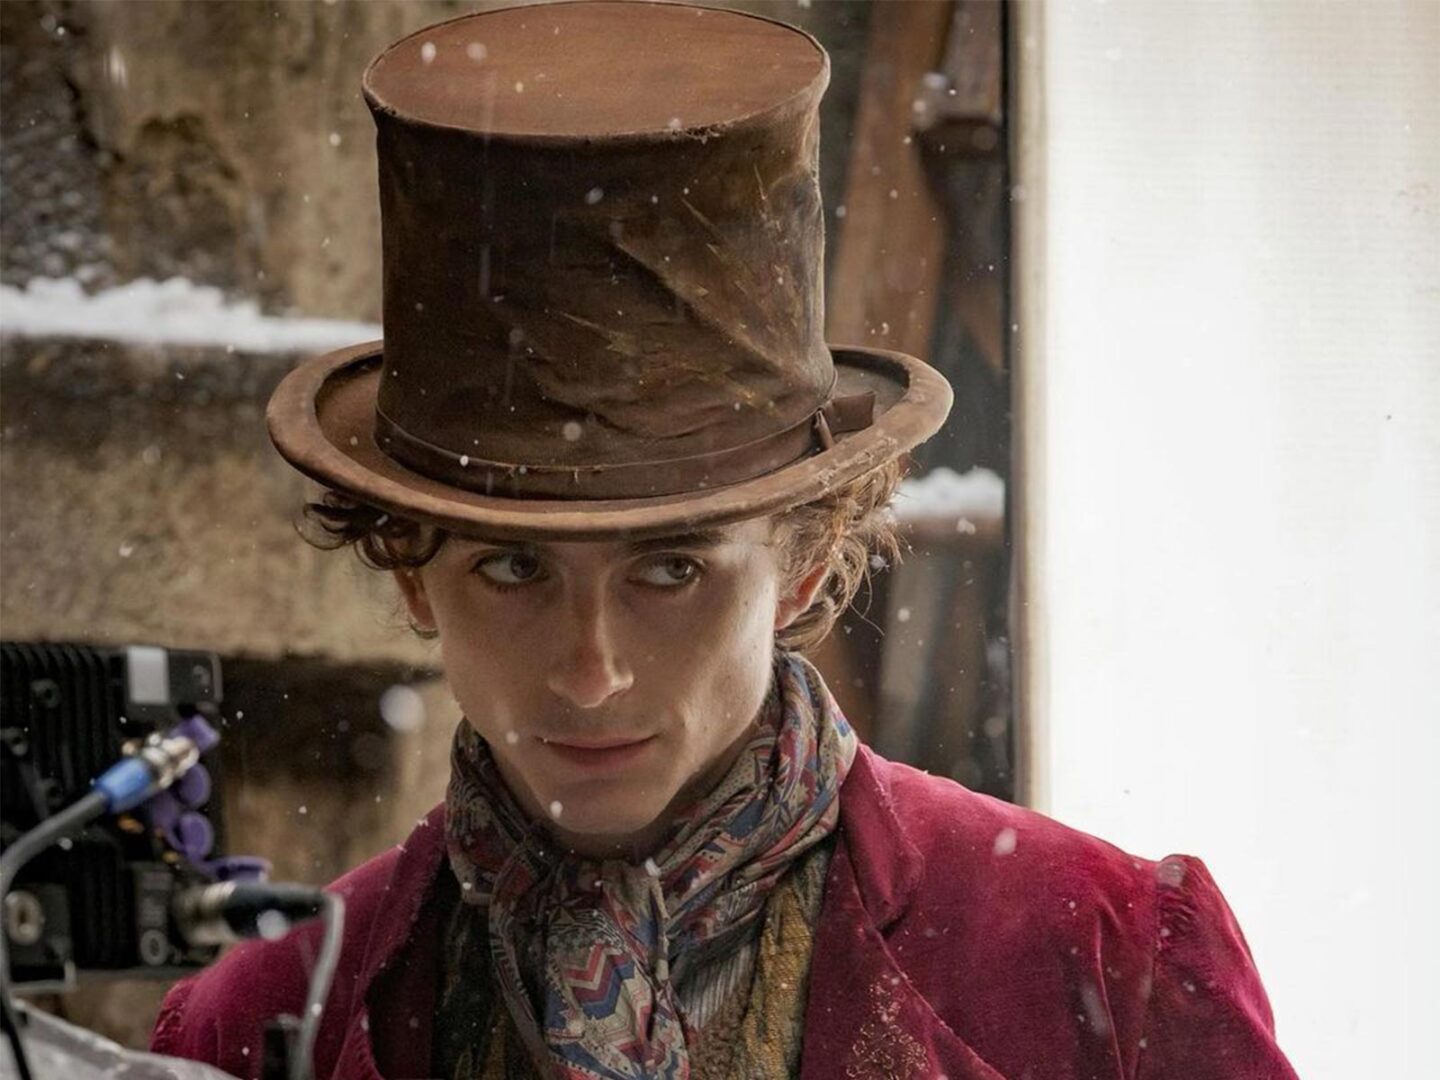 Watch the official trailer for ‘Wonka’ now